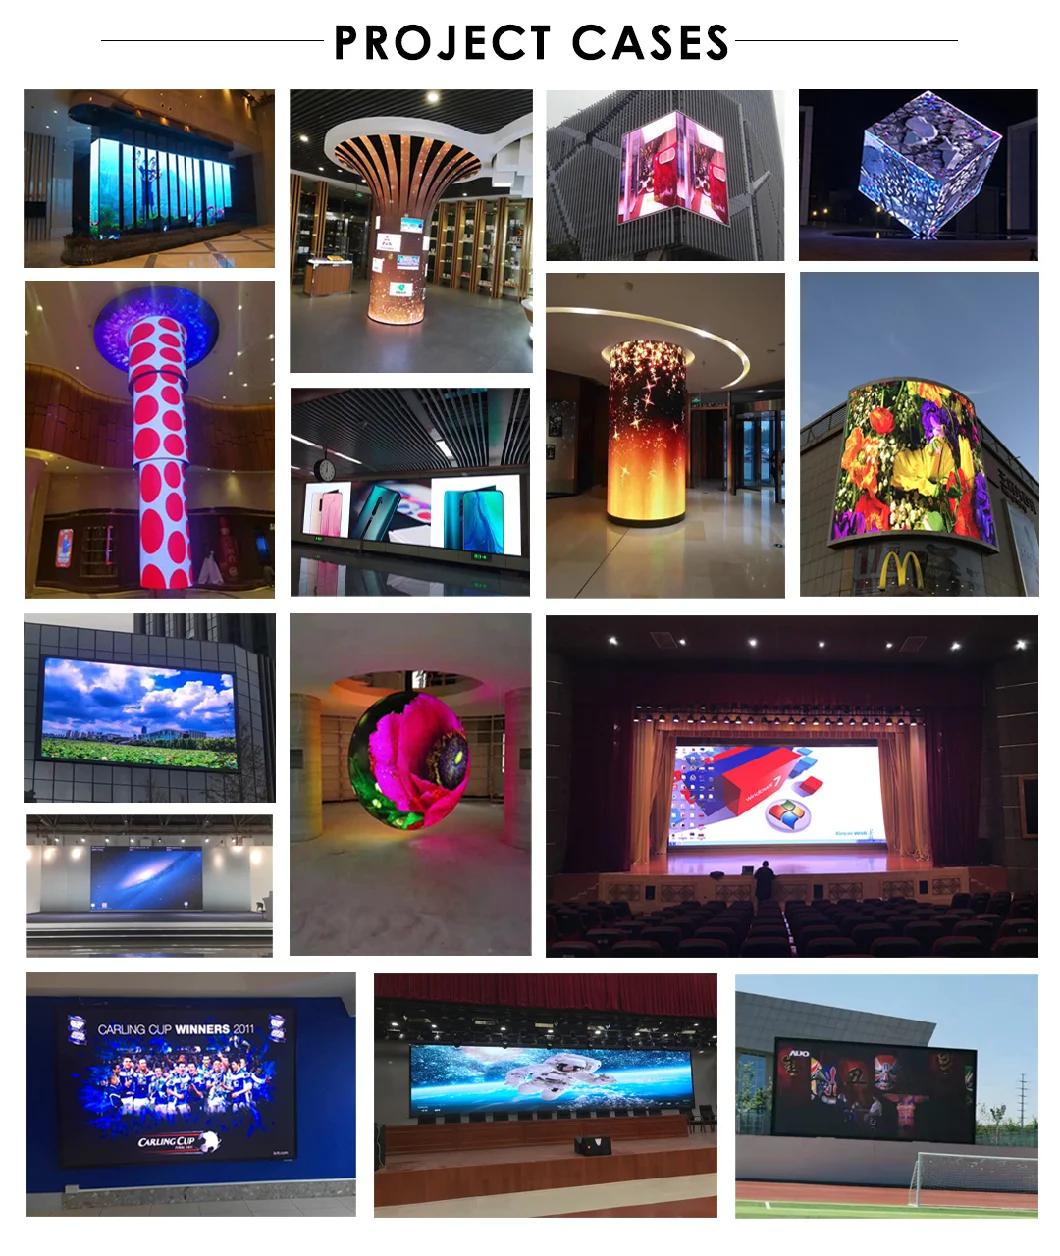 Waterproof Outdoor Removable LED Rental Display Stage Screen P4.81